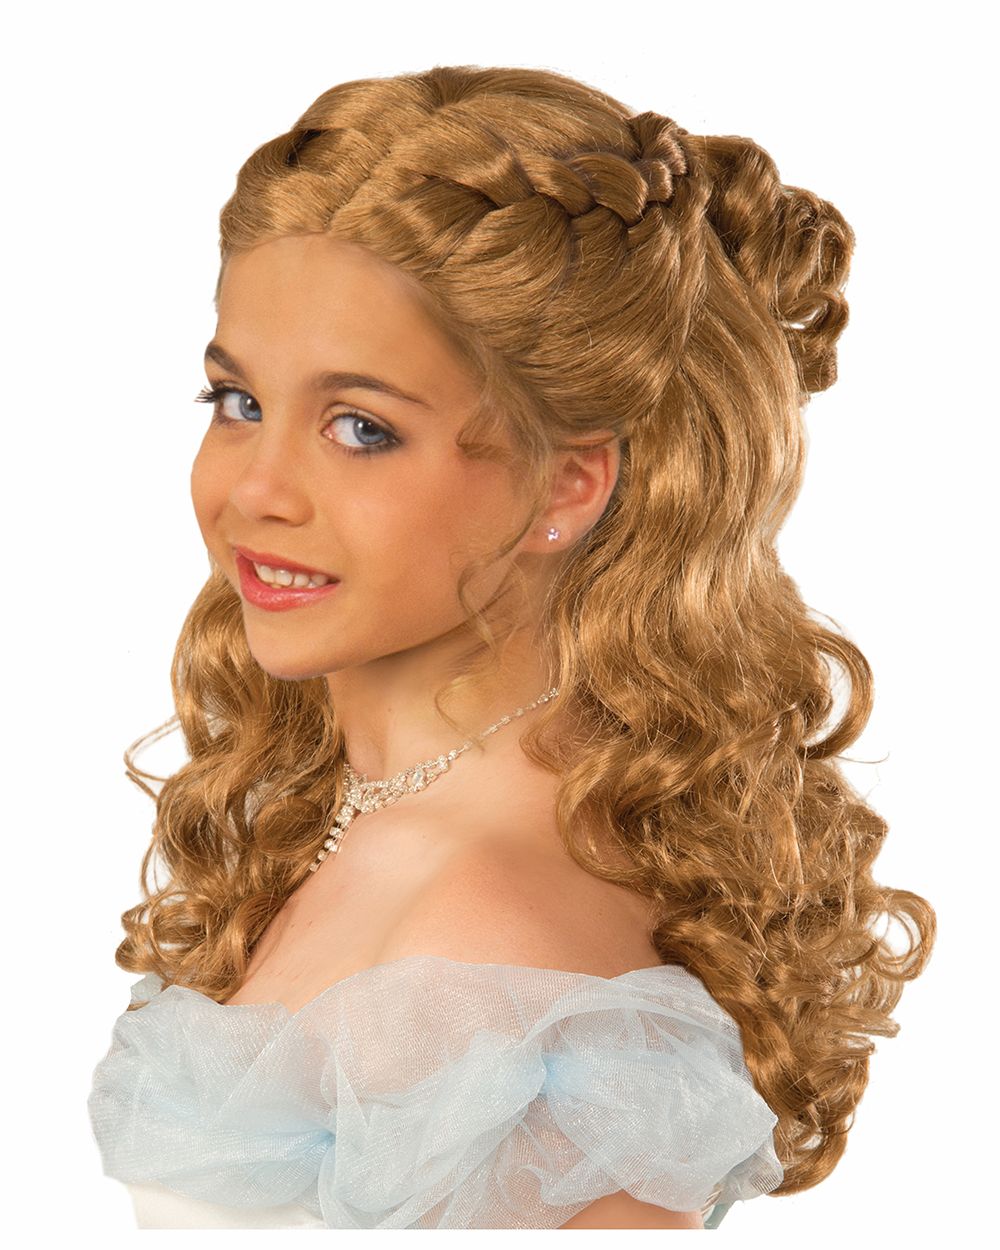 Happily Ever After Child Princess Wig